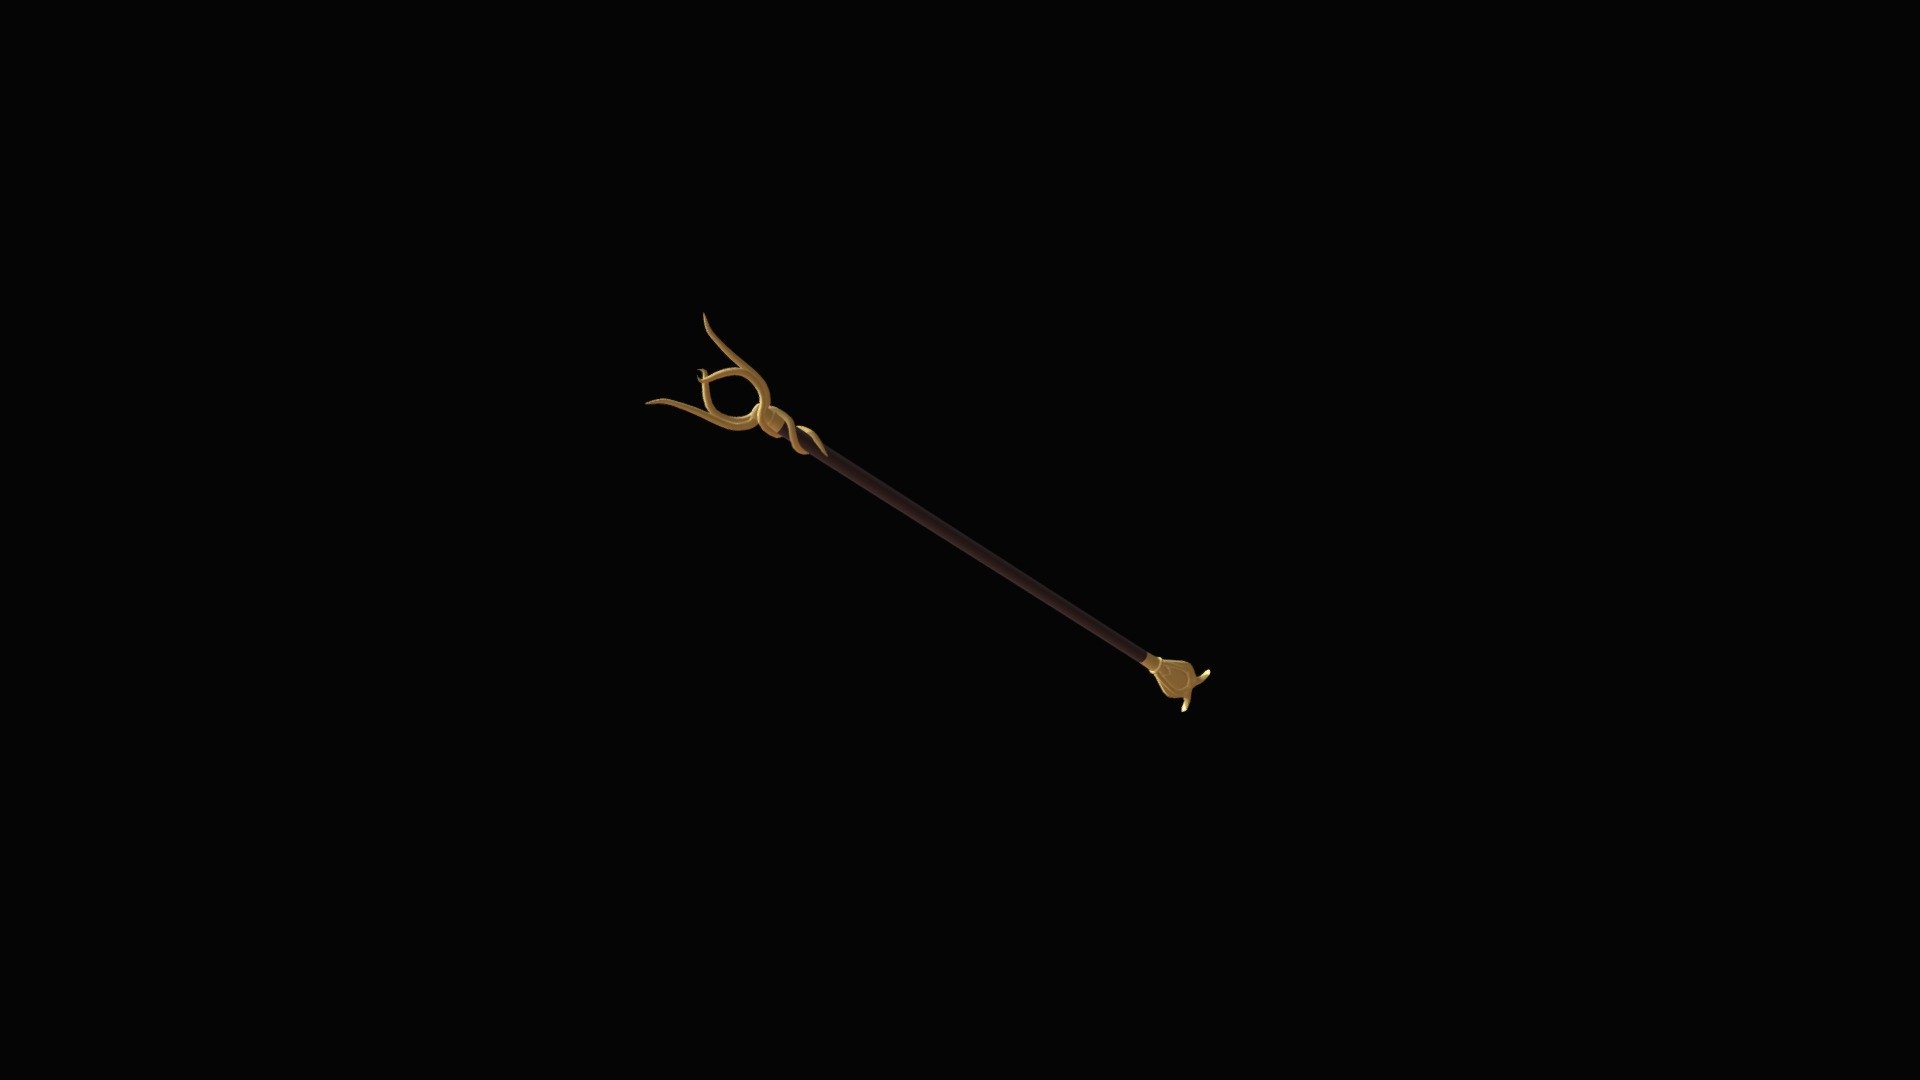 This is my own simple take on the weapon of the League of Legends champion, Lux. 

Modeled in Maya 3d model